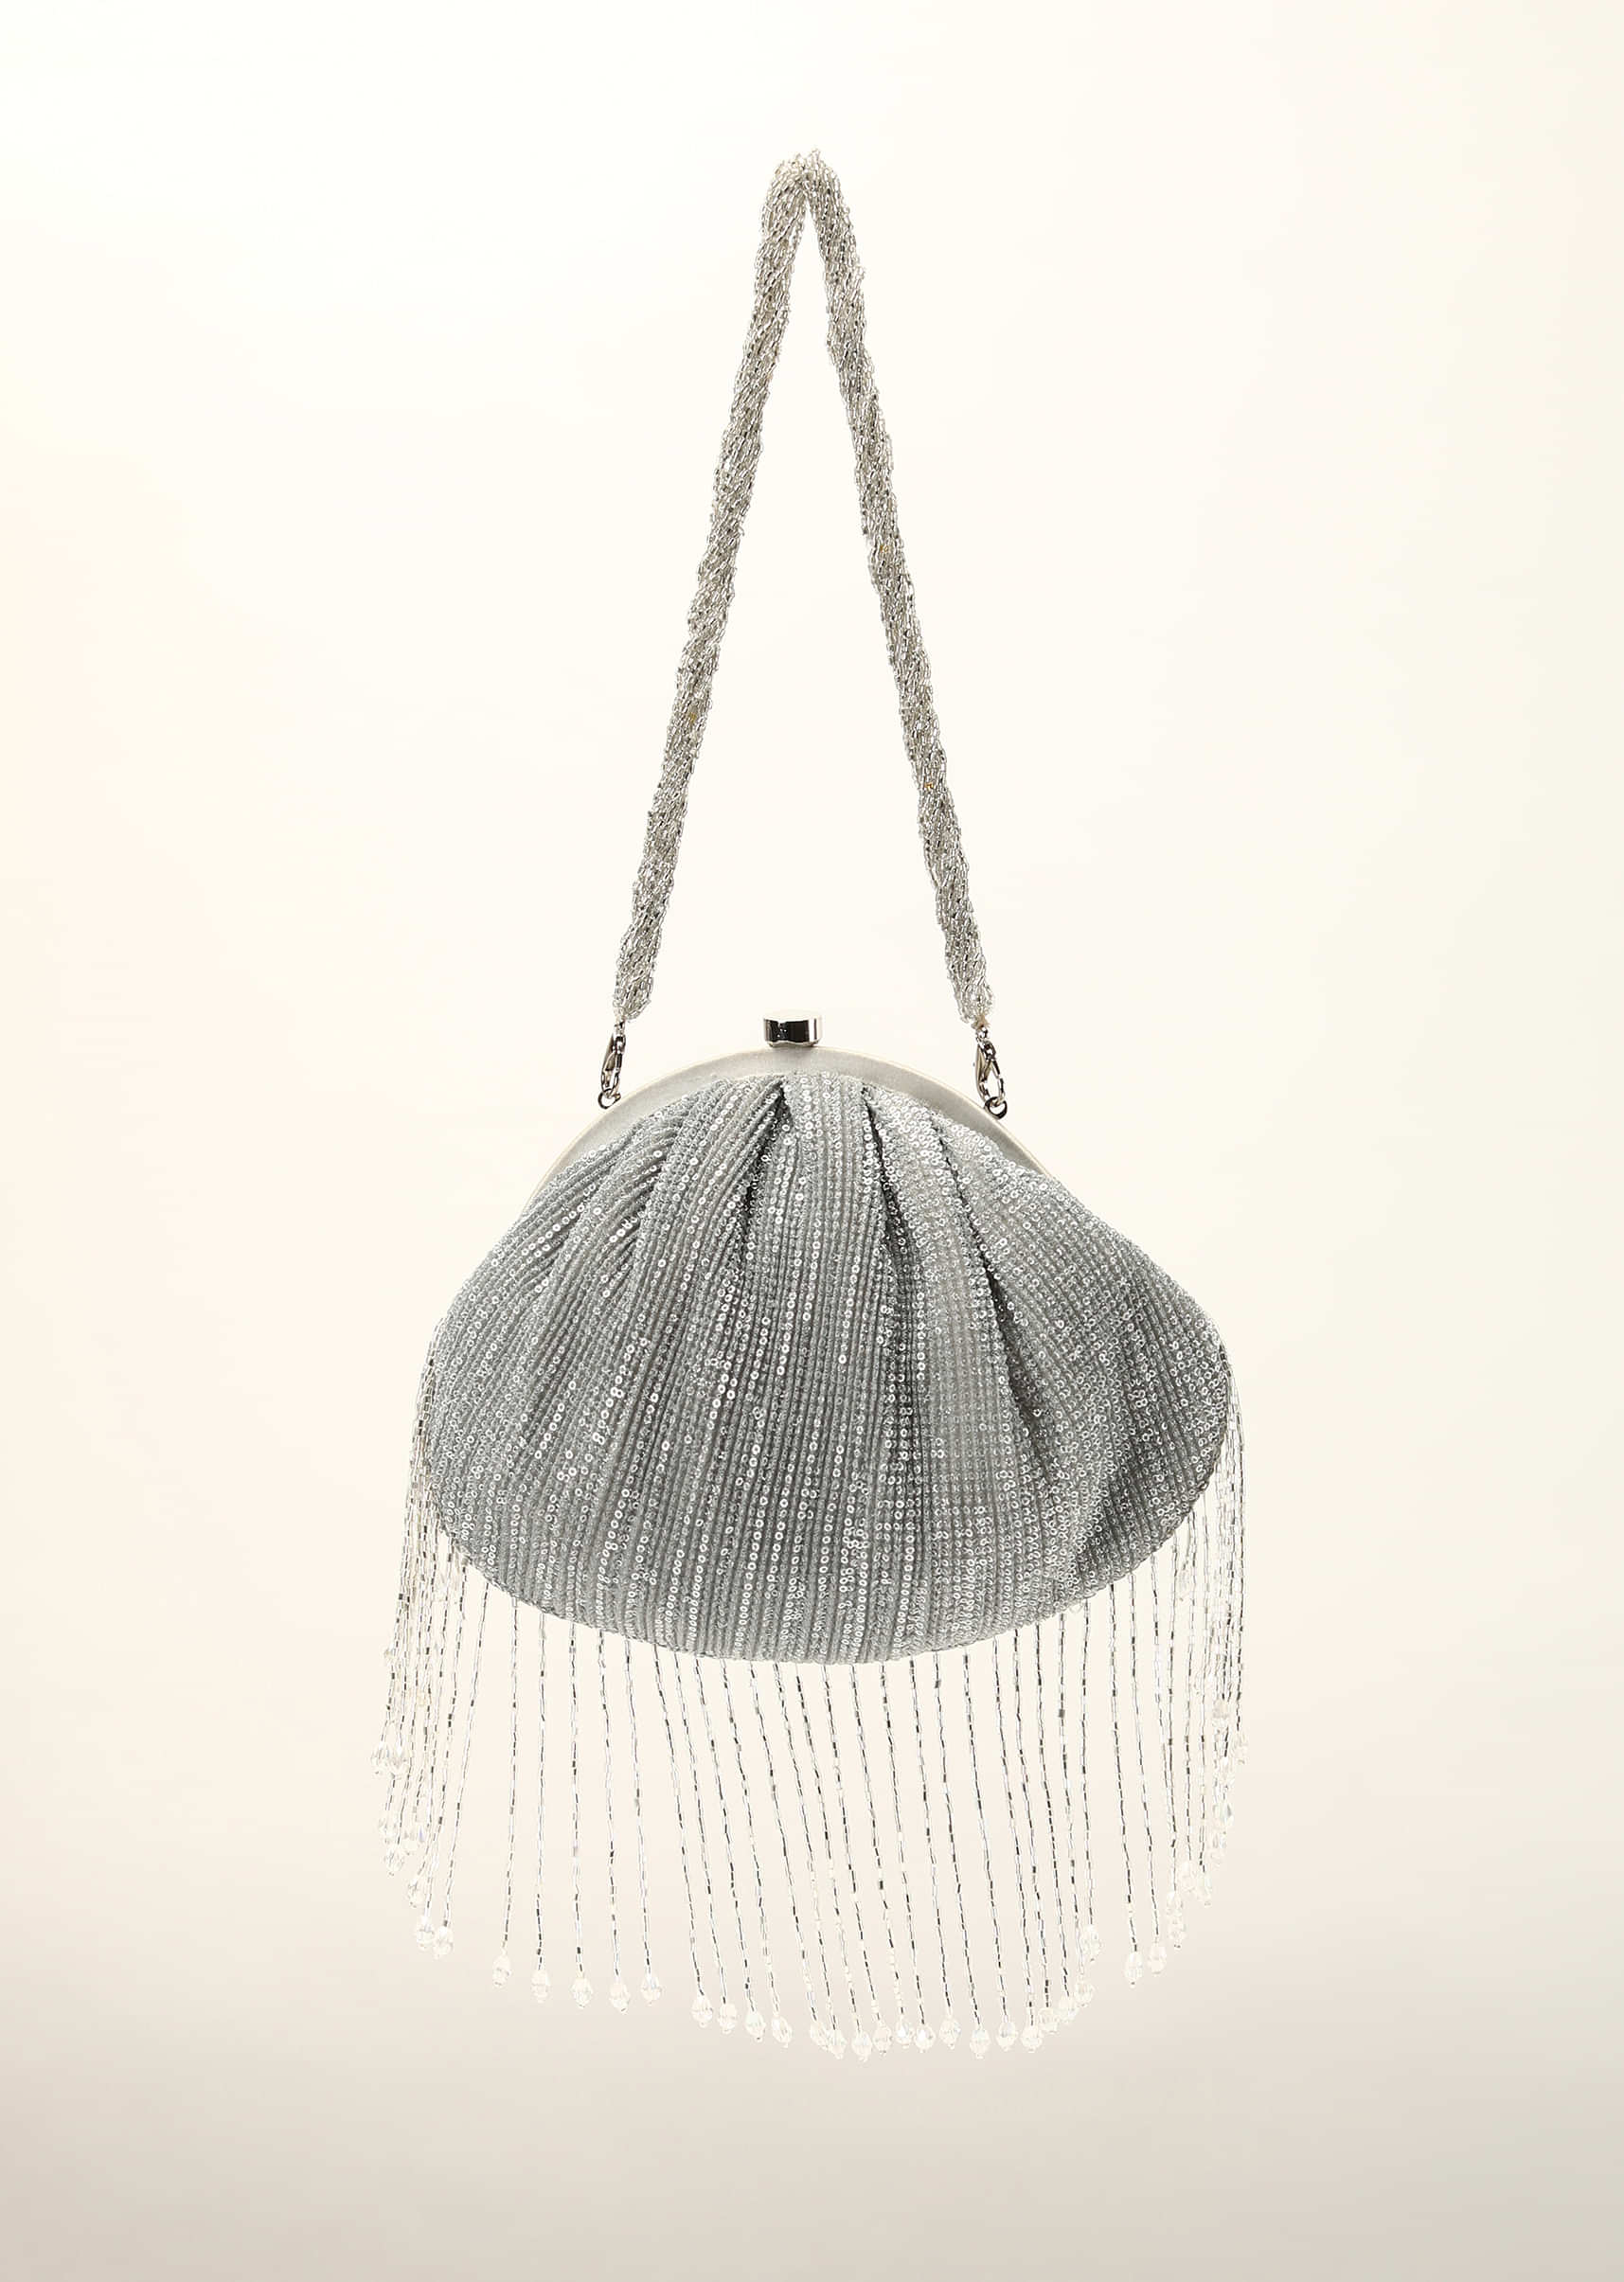 Silver Clutch In Crushed Sequins Fabric With Cut Dana Fringes On The Edges